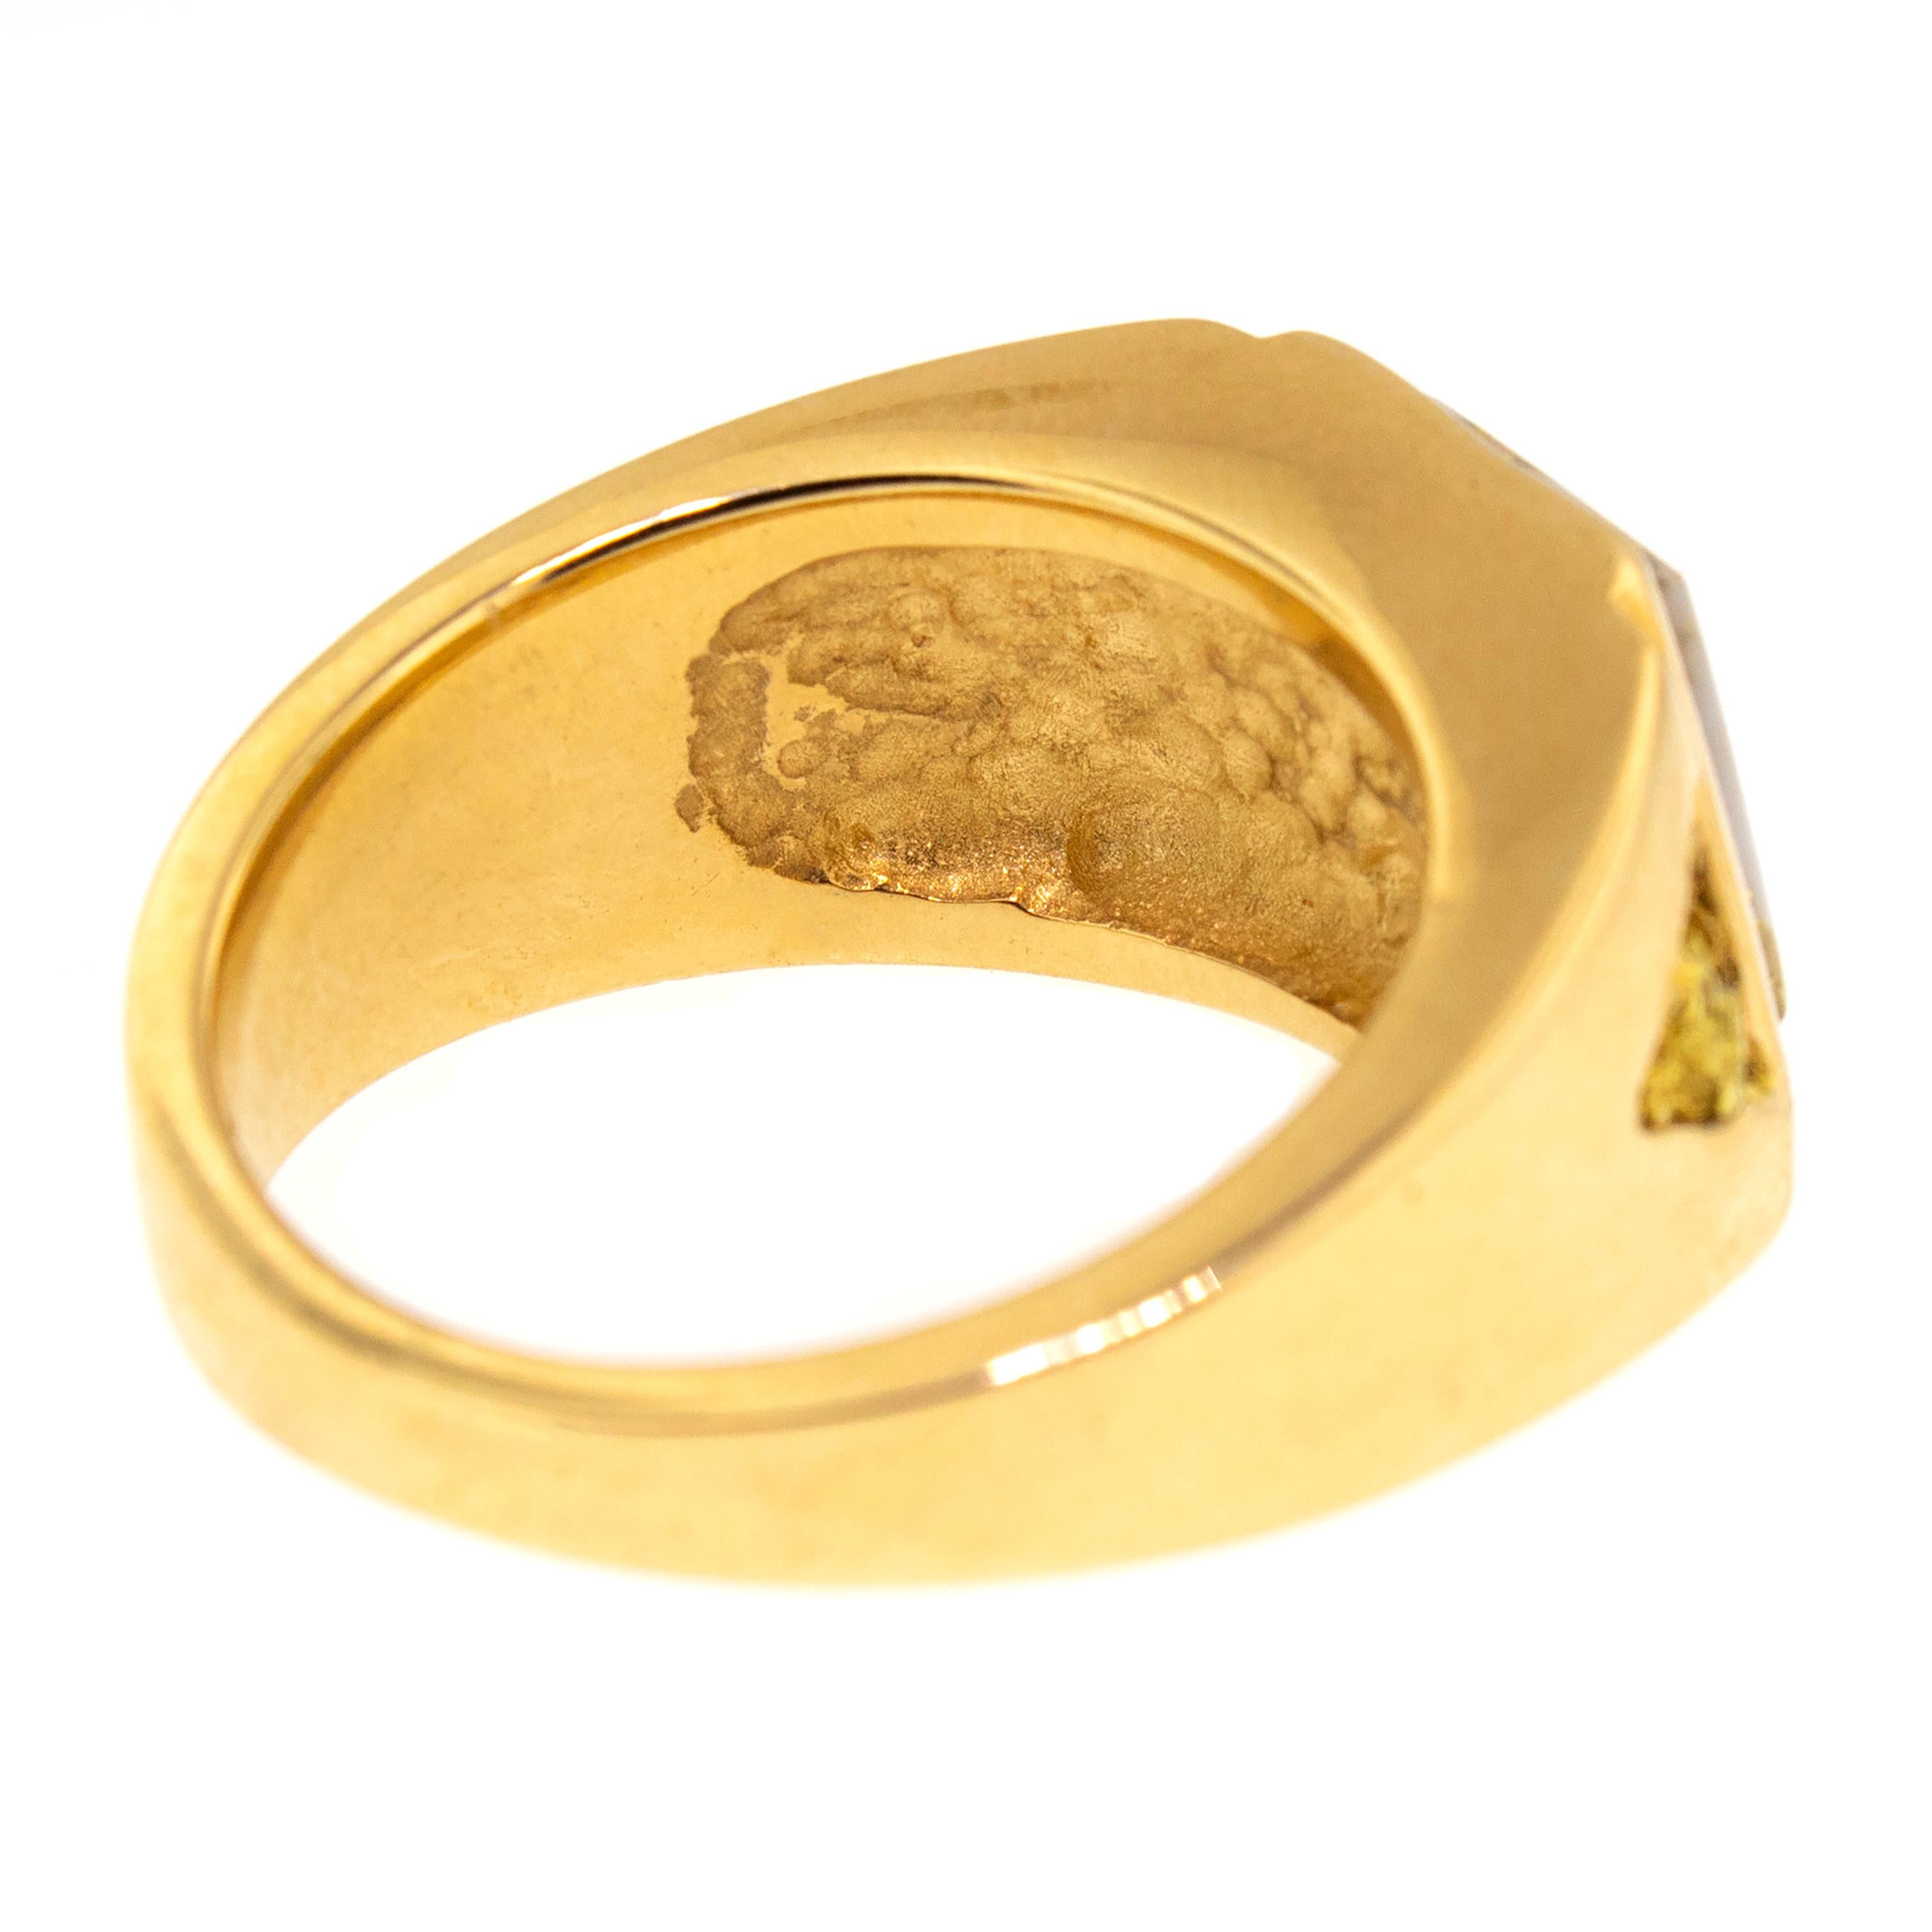 Trapezoid Cut Natural Gold in Quartz and Gold Nugget 14 Karat Gold Men’s Ring